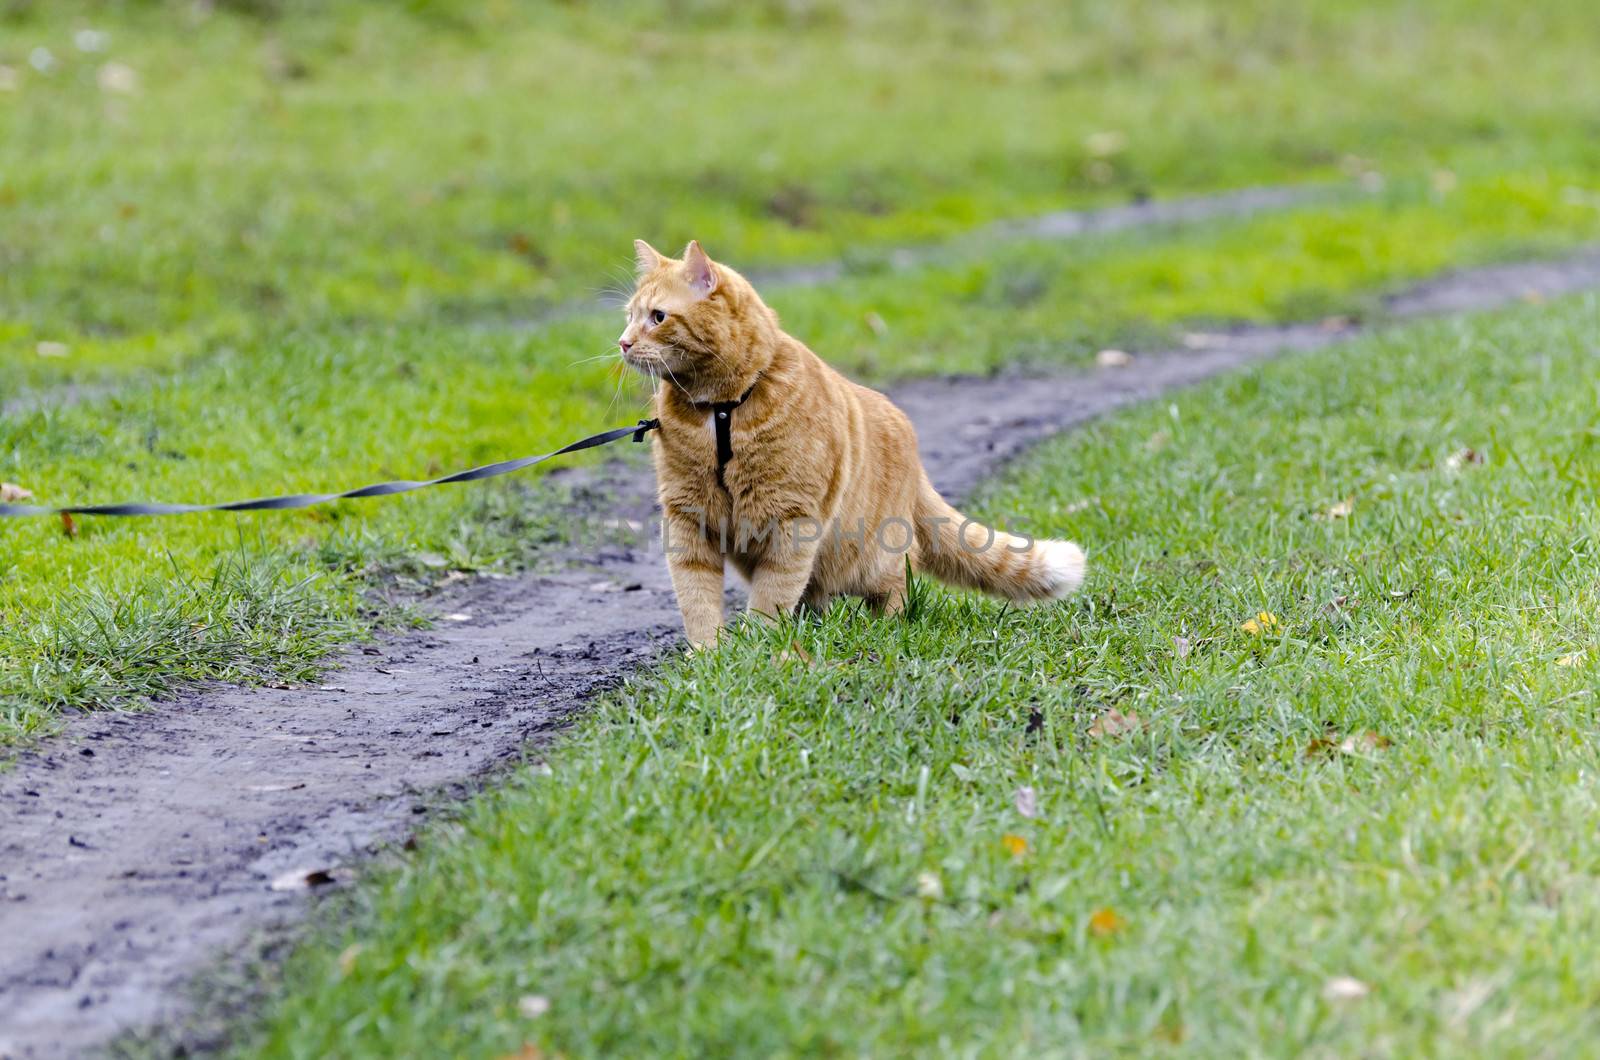 Red cat walking through the green grass on a leash stares into the distance